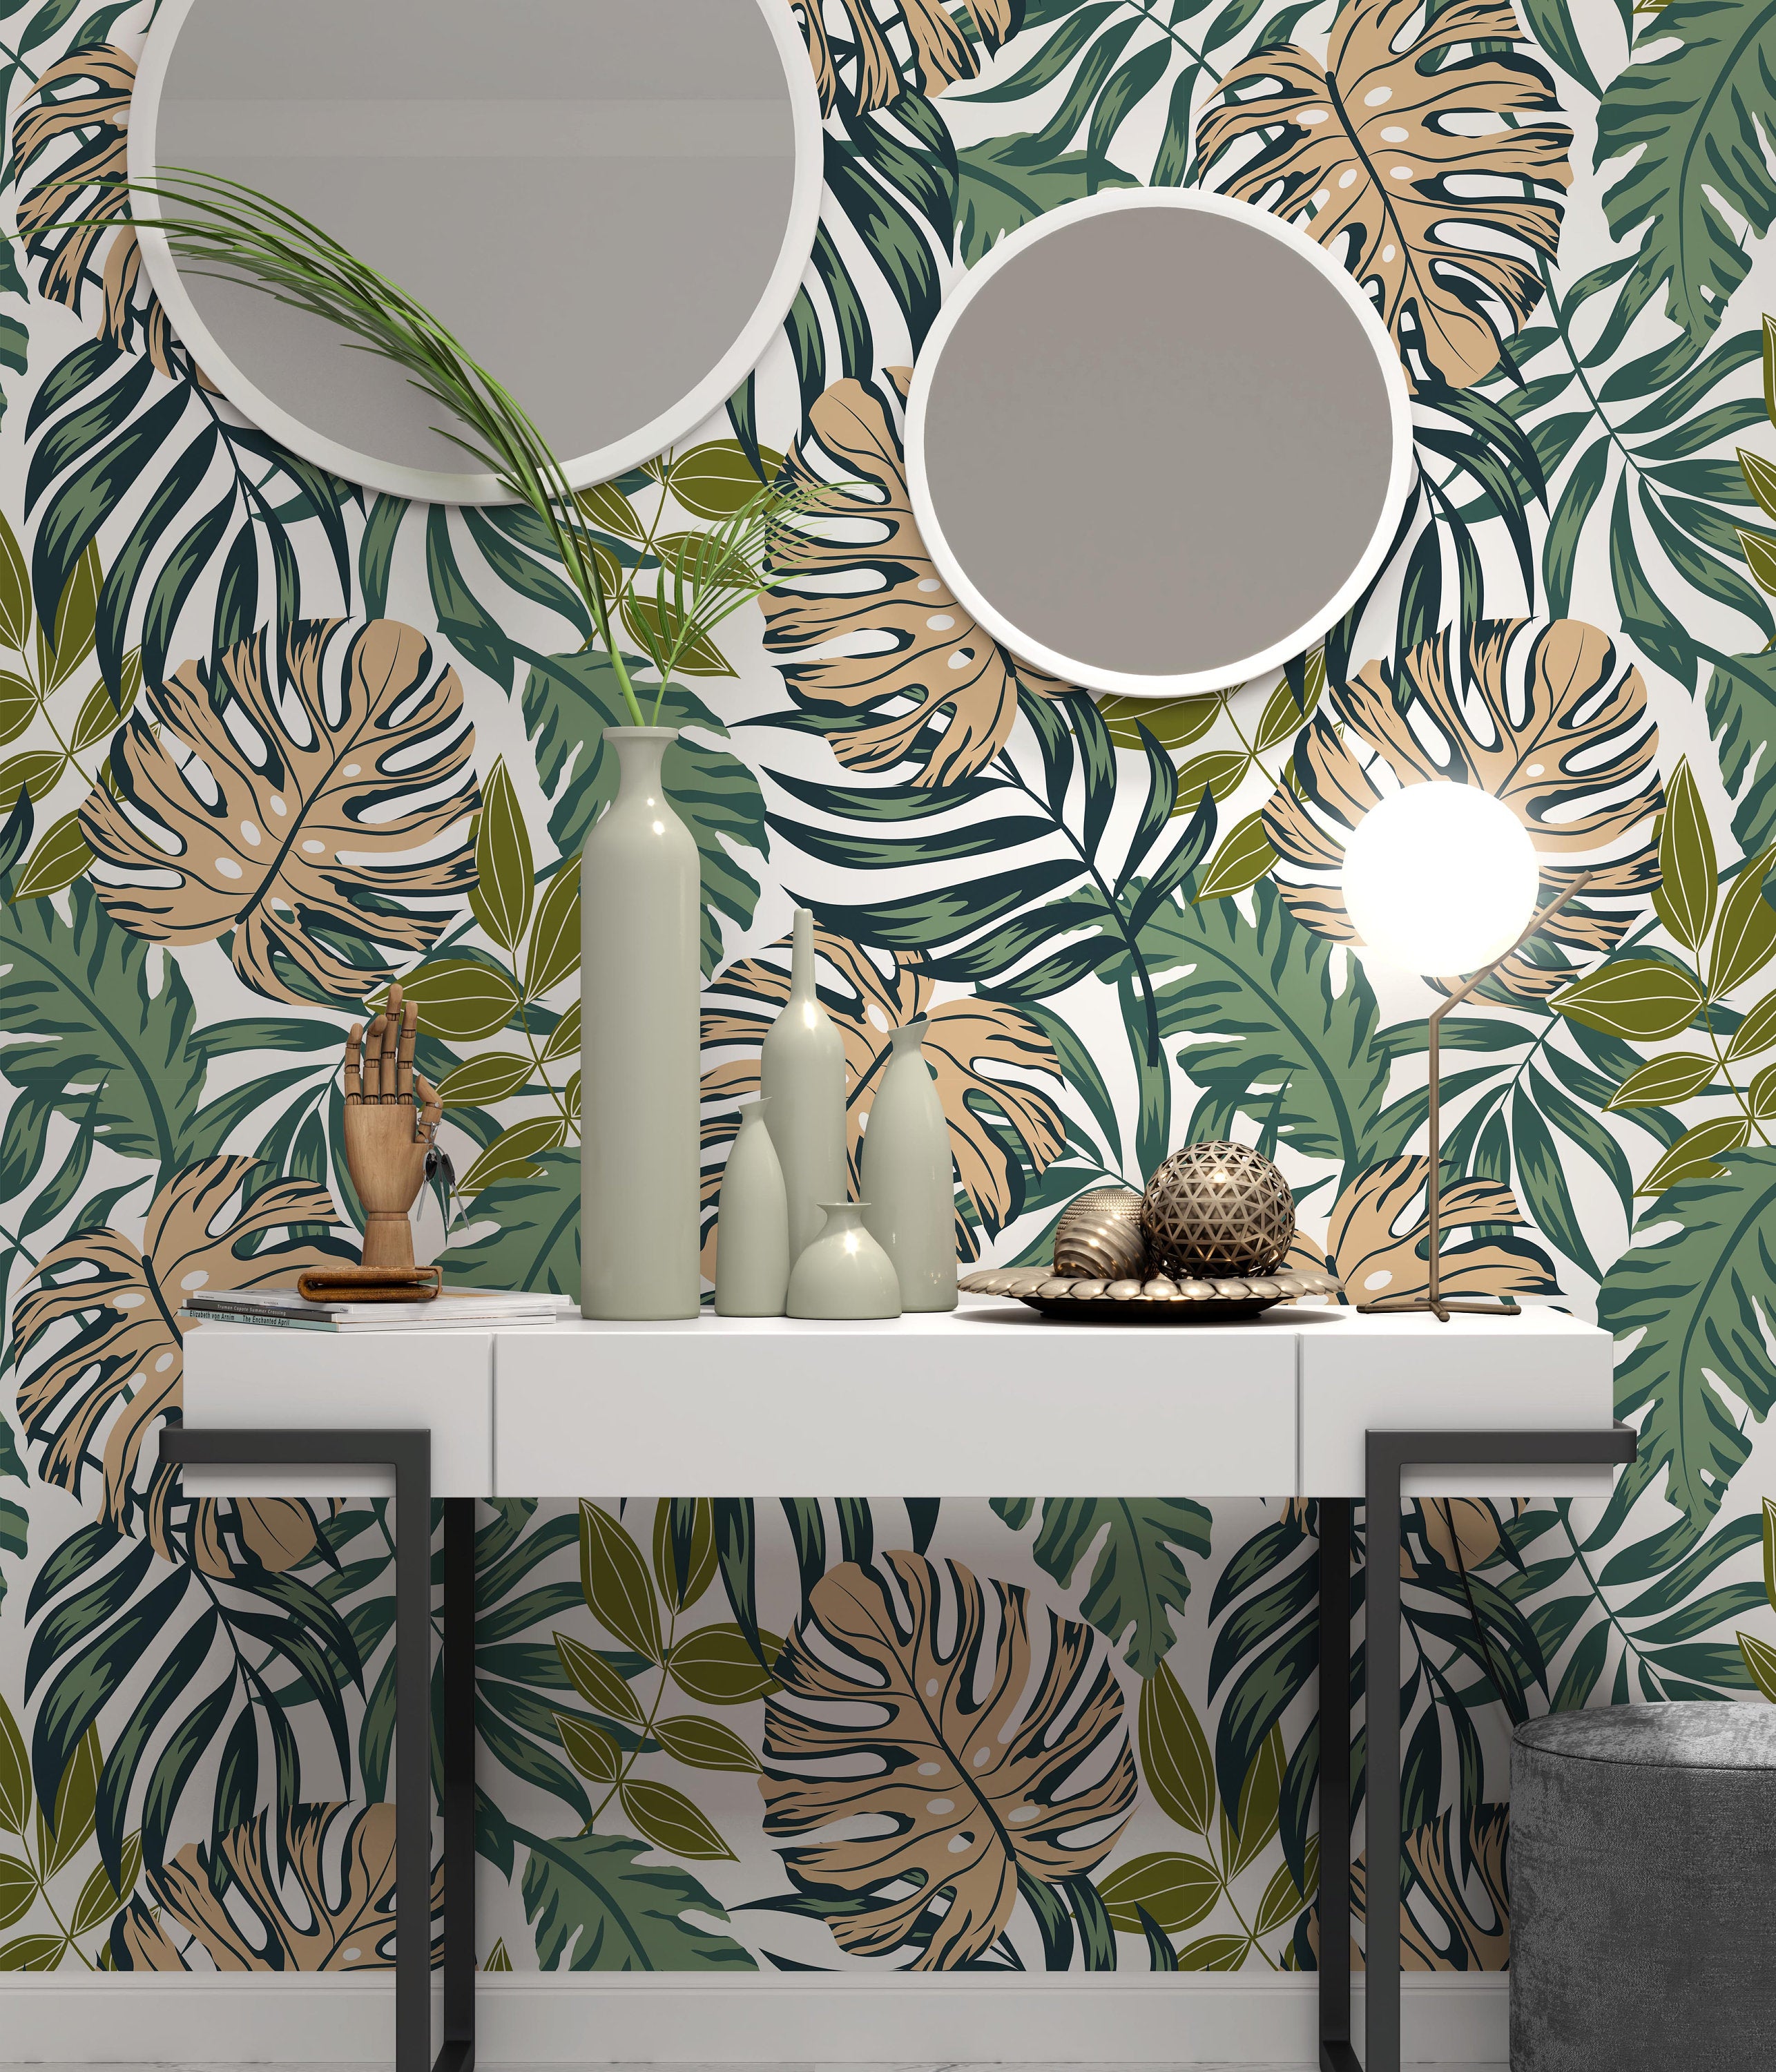 Summer Trend Tropical Exotic Leaves and Bright Plants Wallpaper Self Adhesive Peel and Stick Wall Sticker Wall Decoration Removable